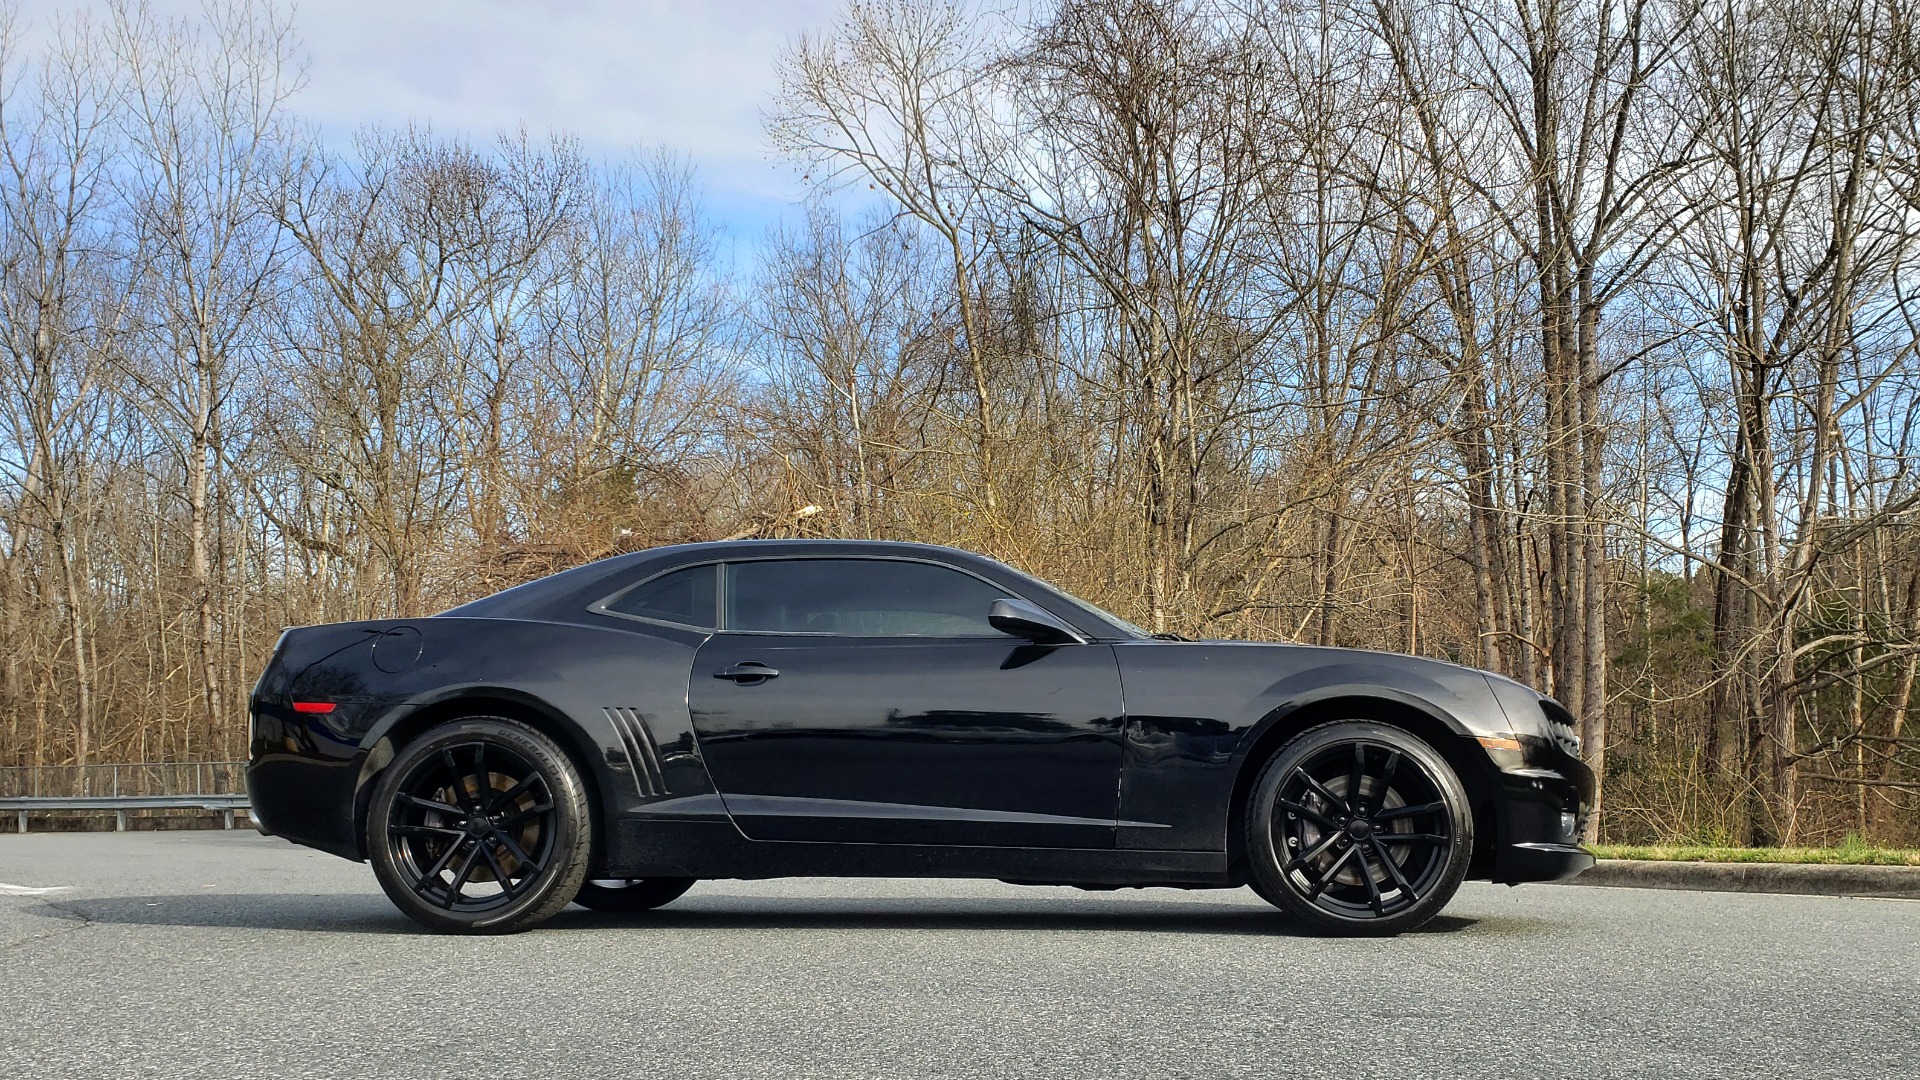 Used 2011 Chevrolet Camaro 2SS / 6.2L V8 / 6-SPEED MANUAL / HEADERS / INTAKE for sale Sold at Formula Imports in Charlotte NC 28227 5